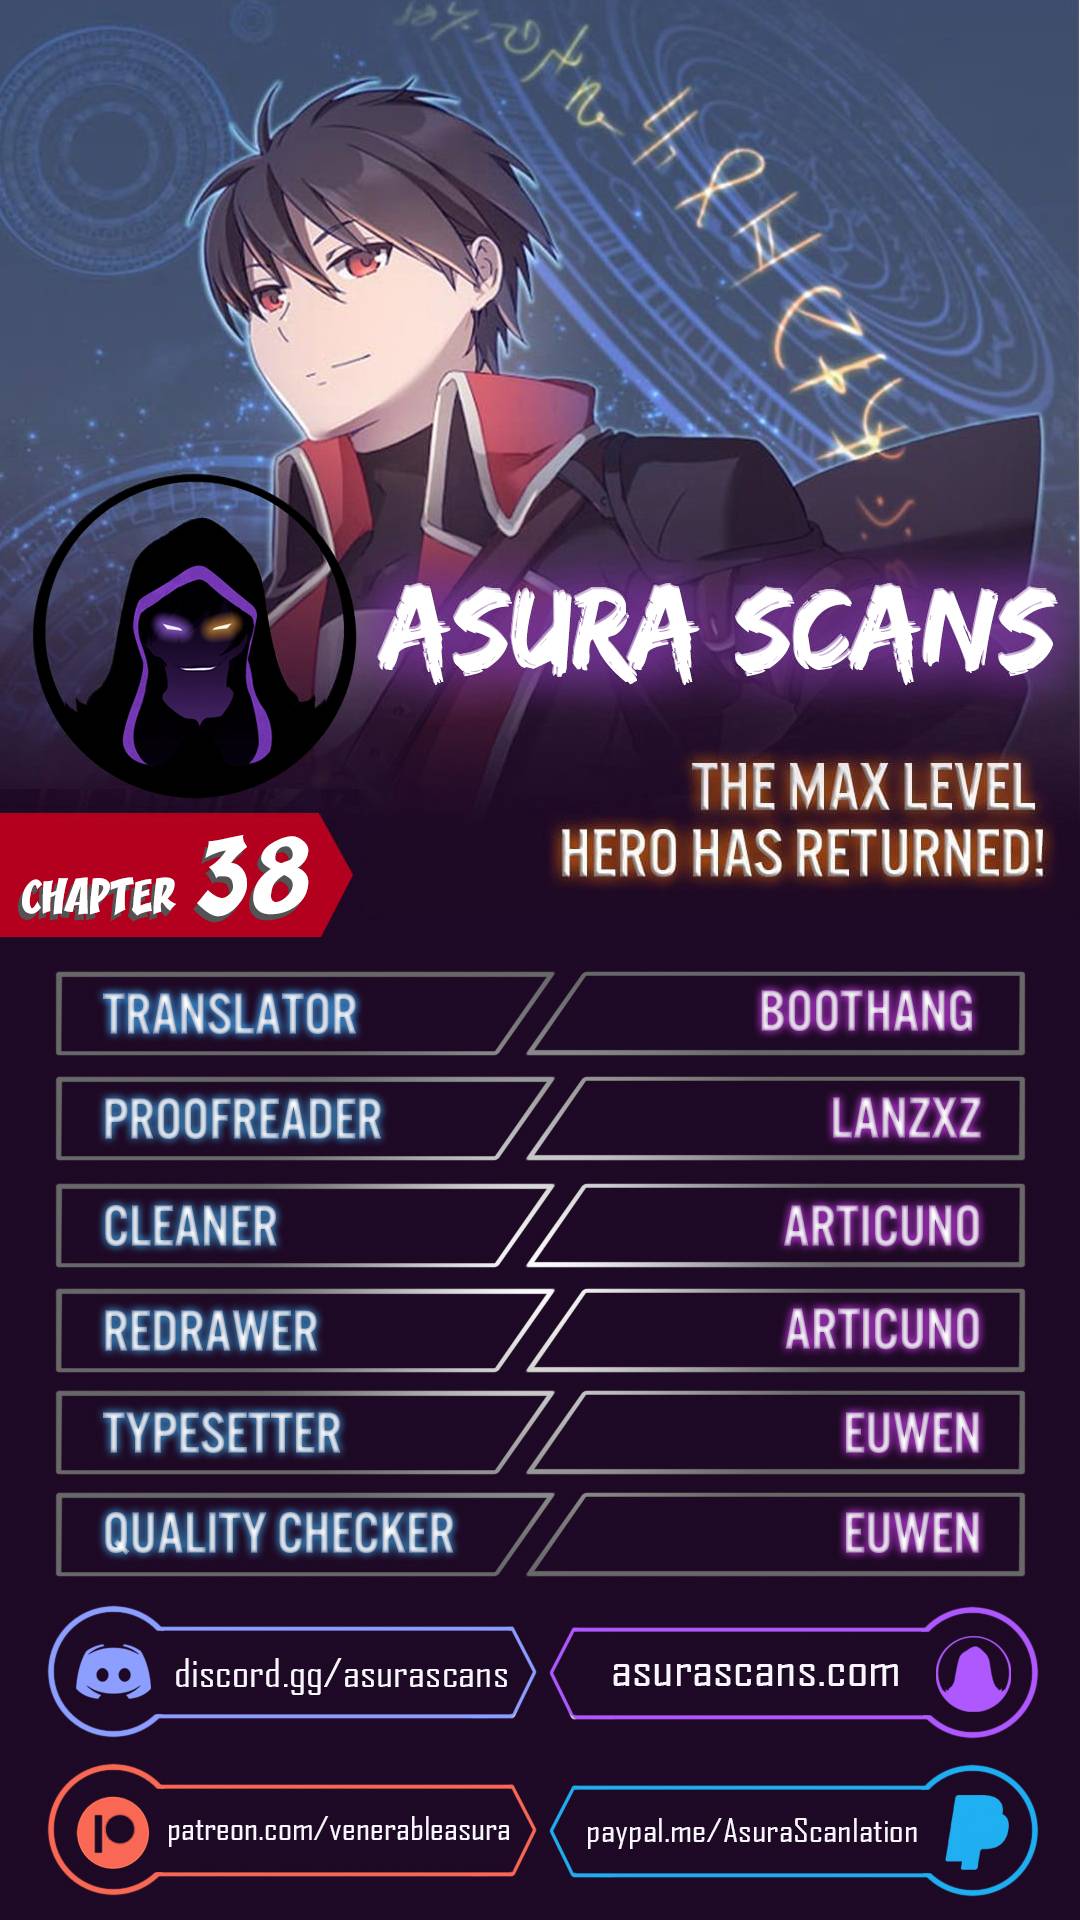 The MAX leveled hero will return! Chapter 38